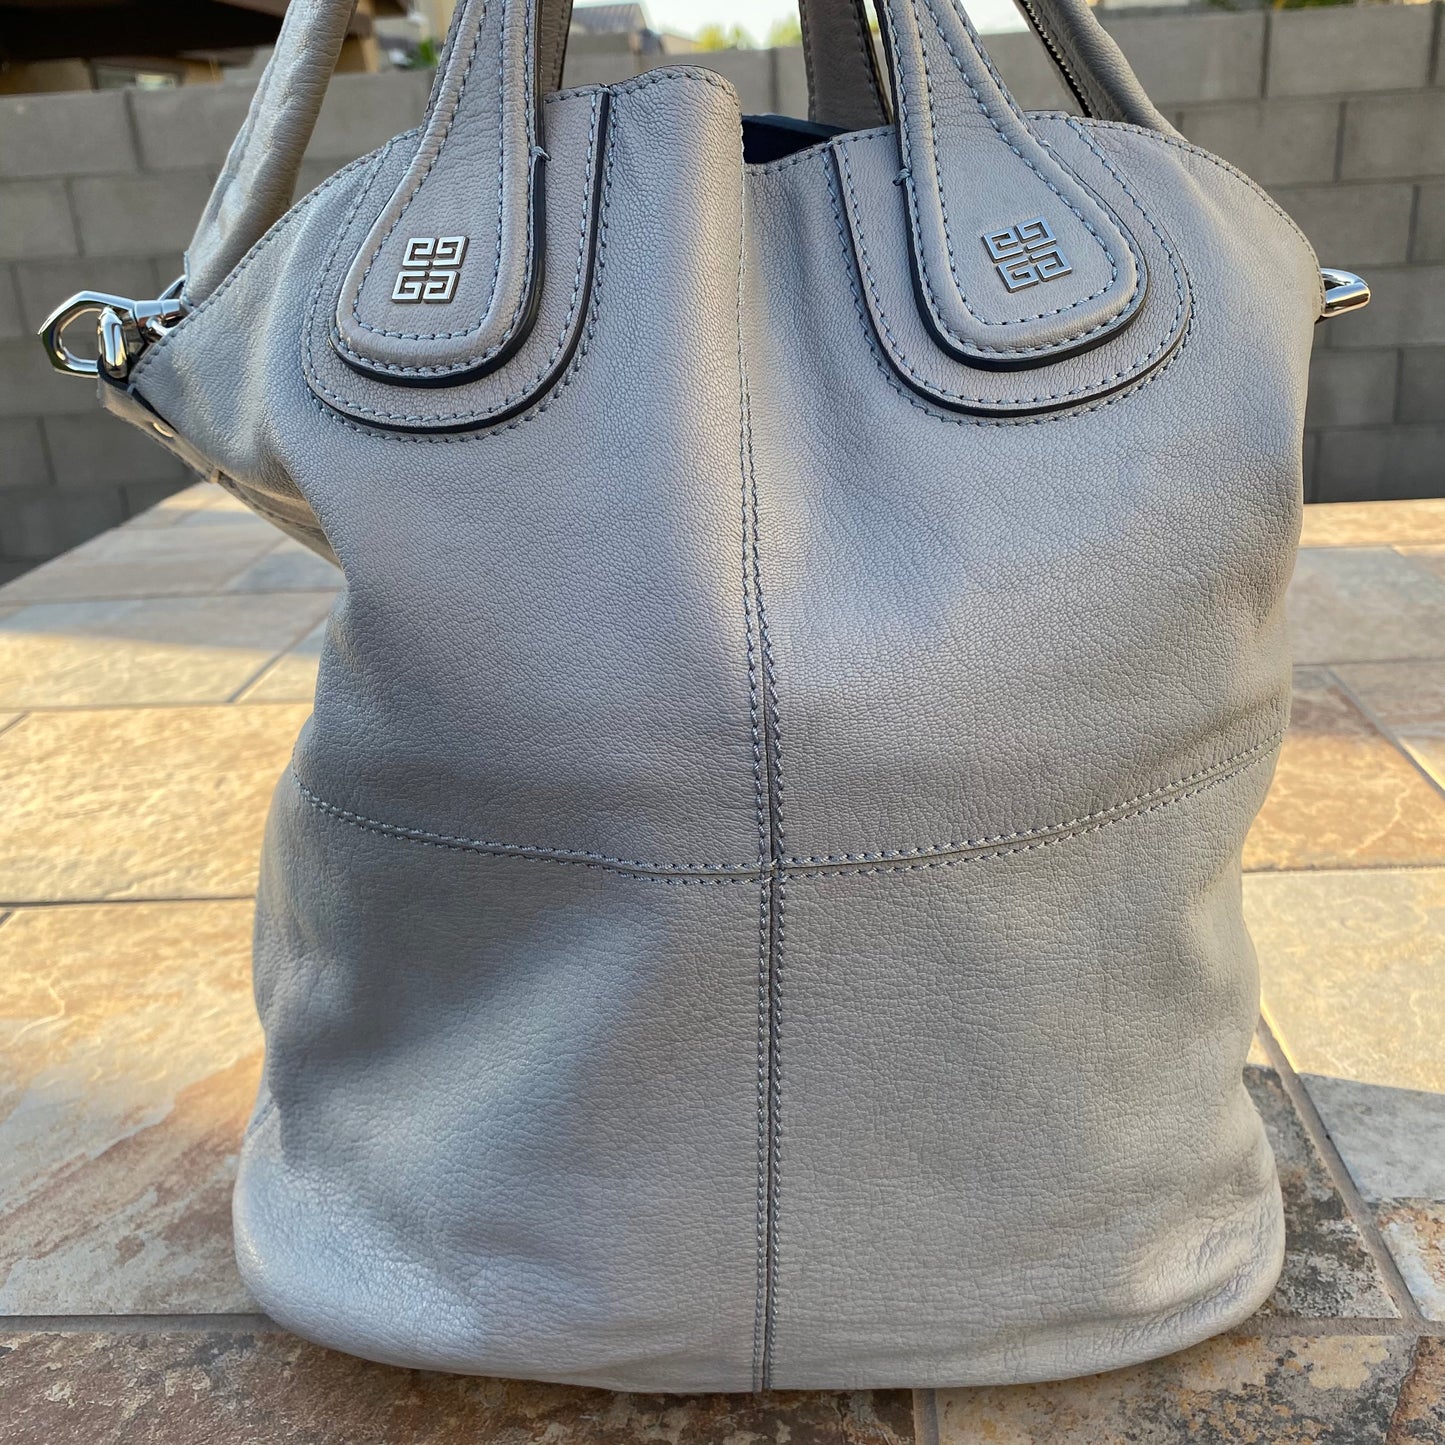 Givenchy Nightingale Large Leather Tote